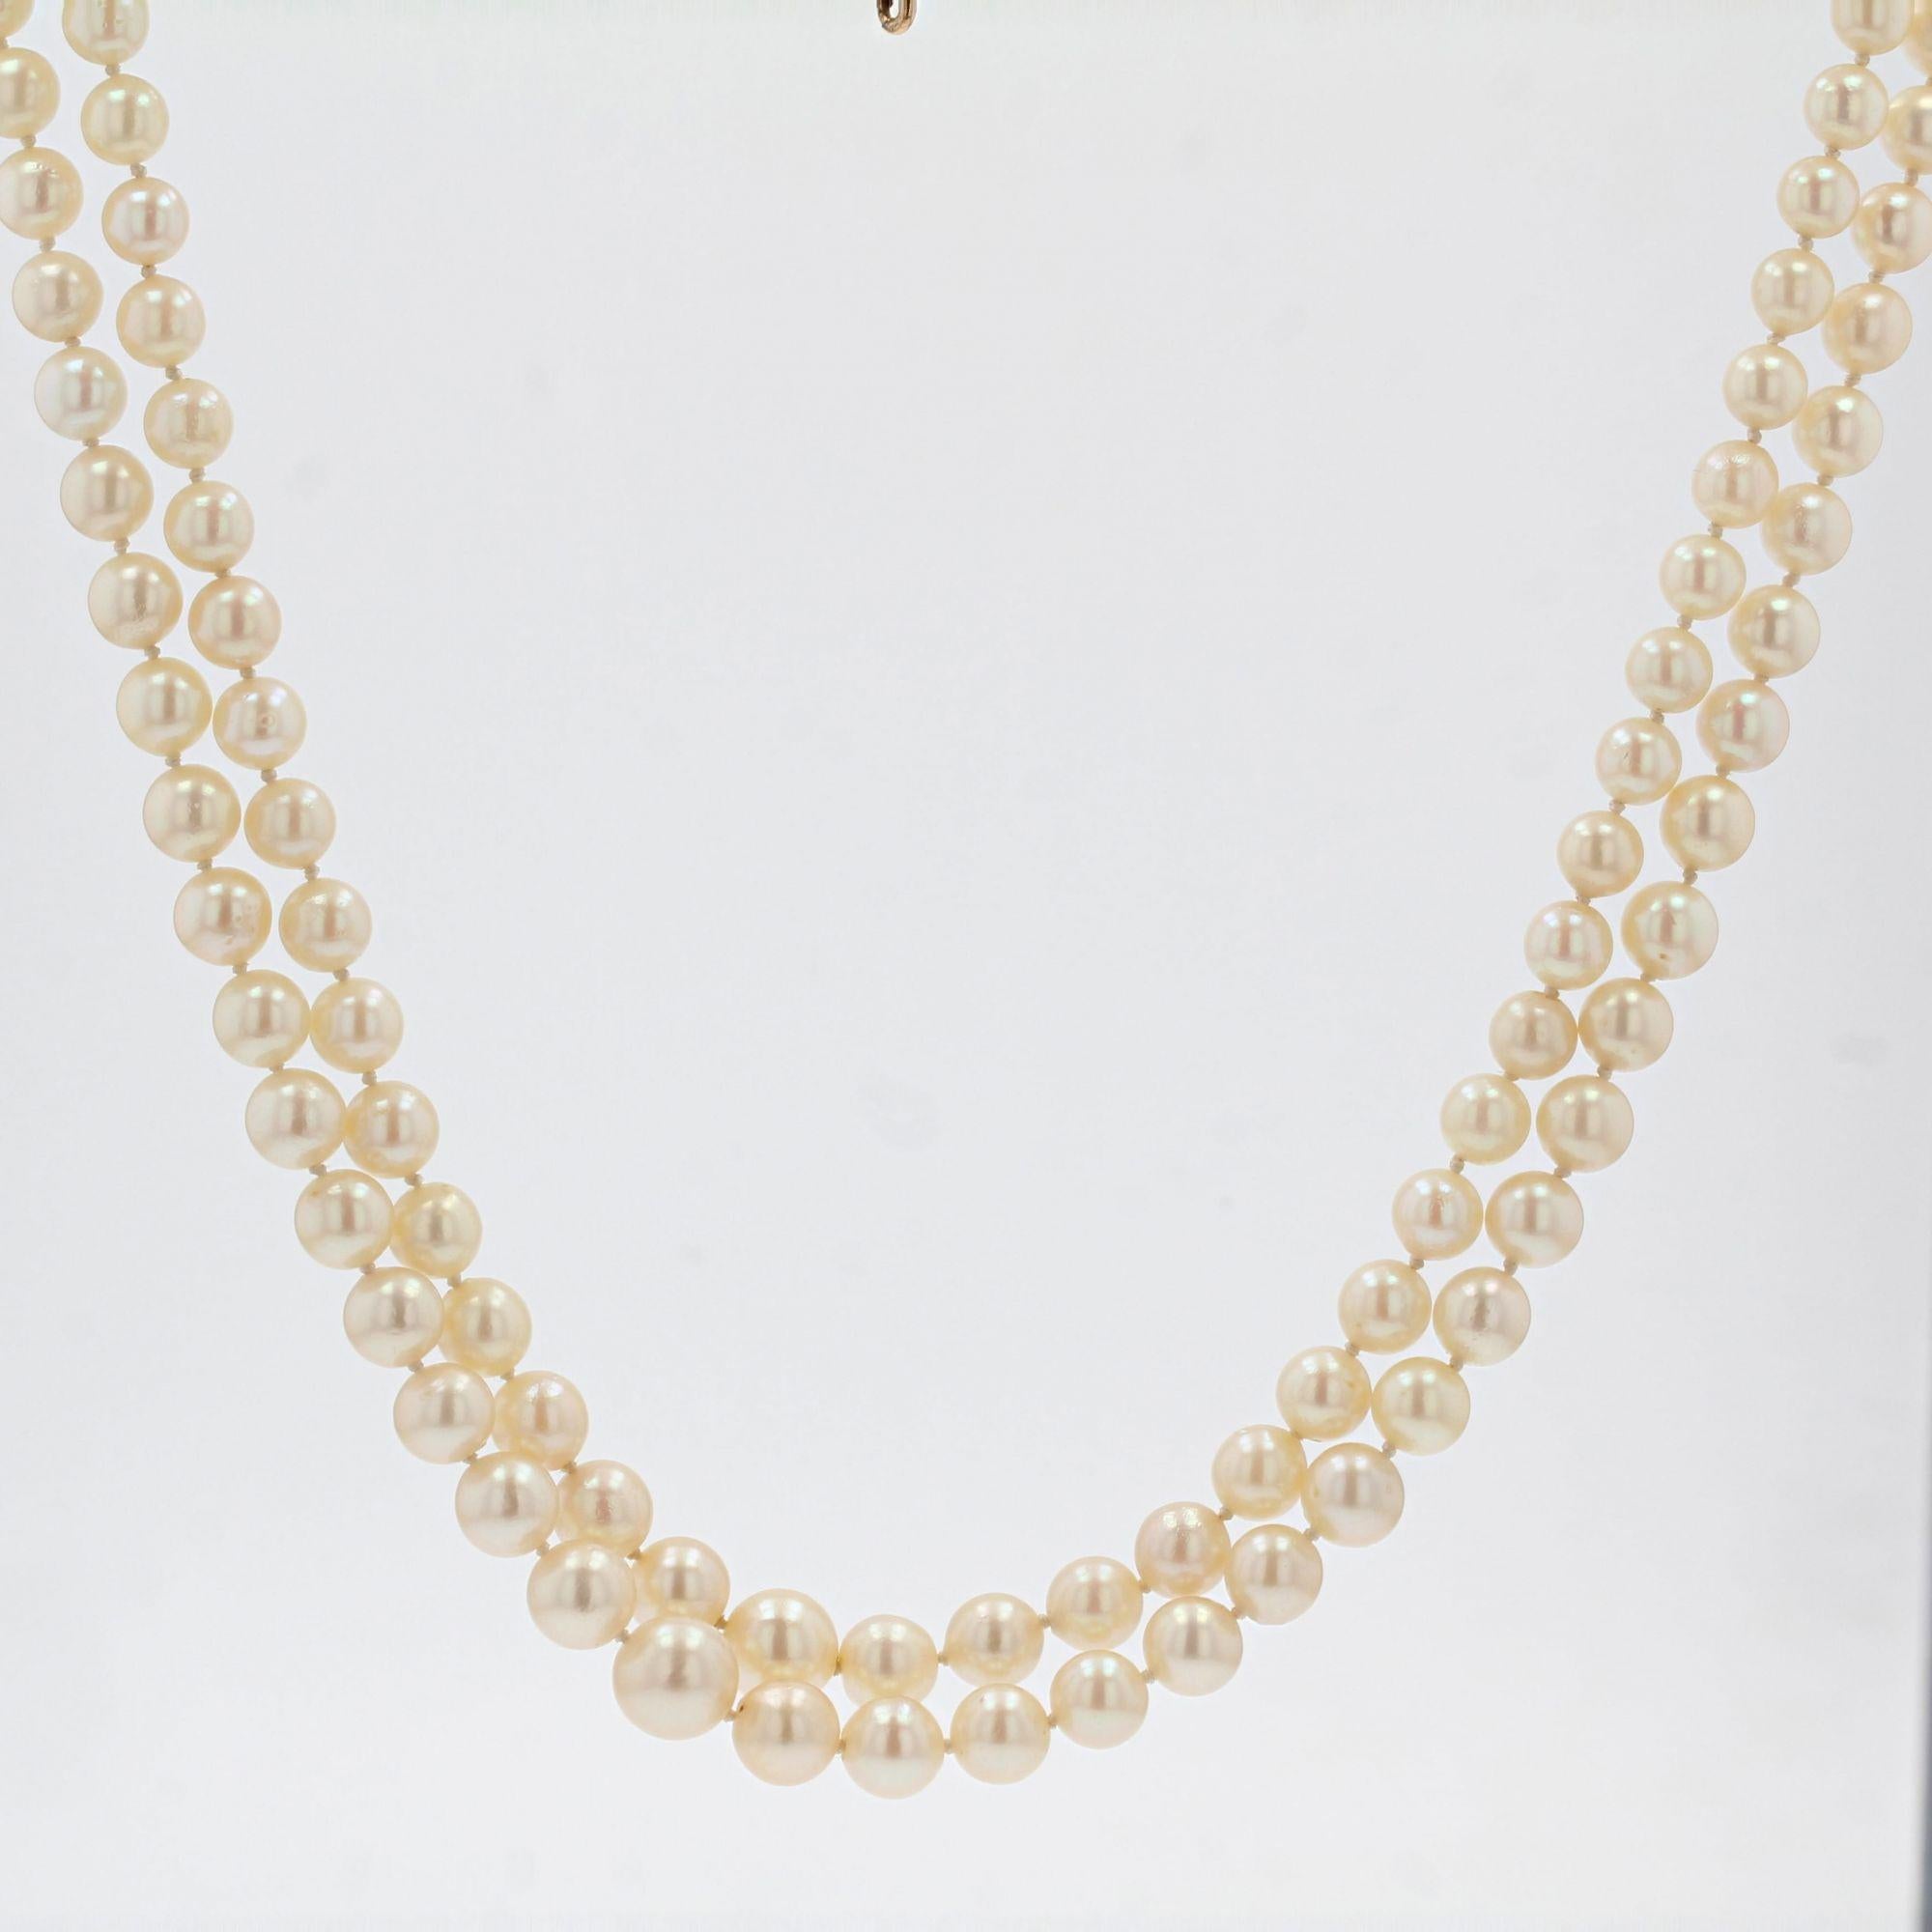 Women's French 1950s Double Row Cultured Falling Pearl Necklace